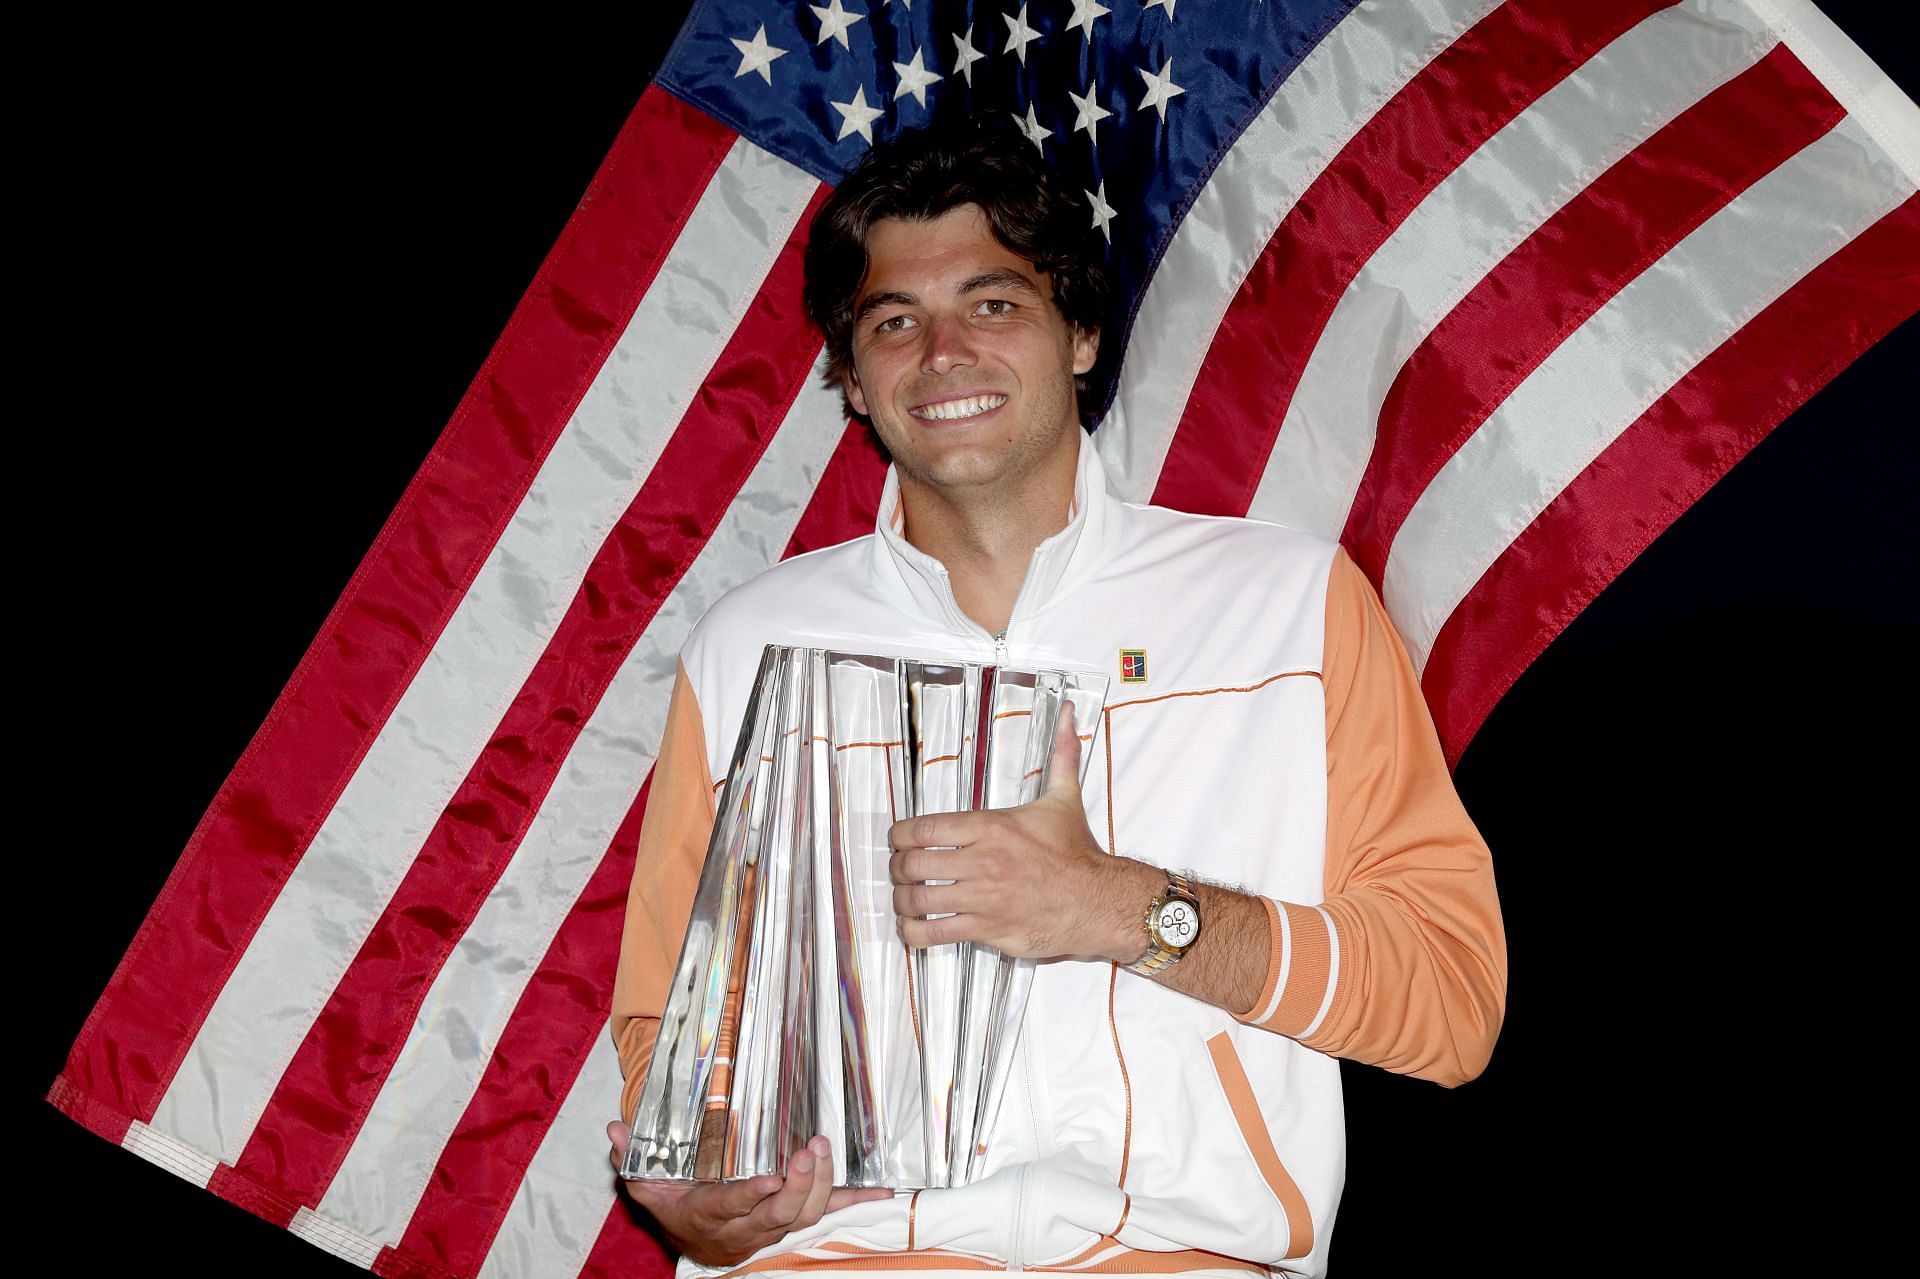 Taylor Fritz with the Indian Wells Masters trophy